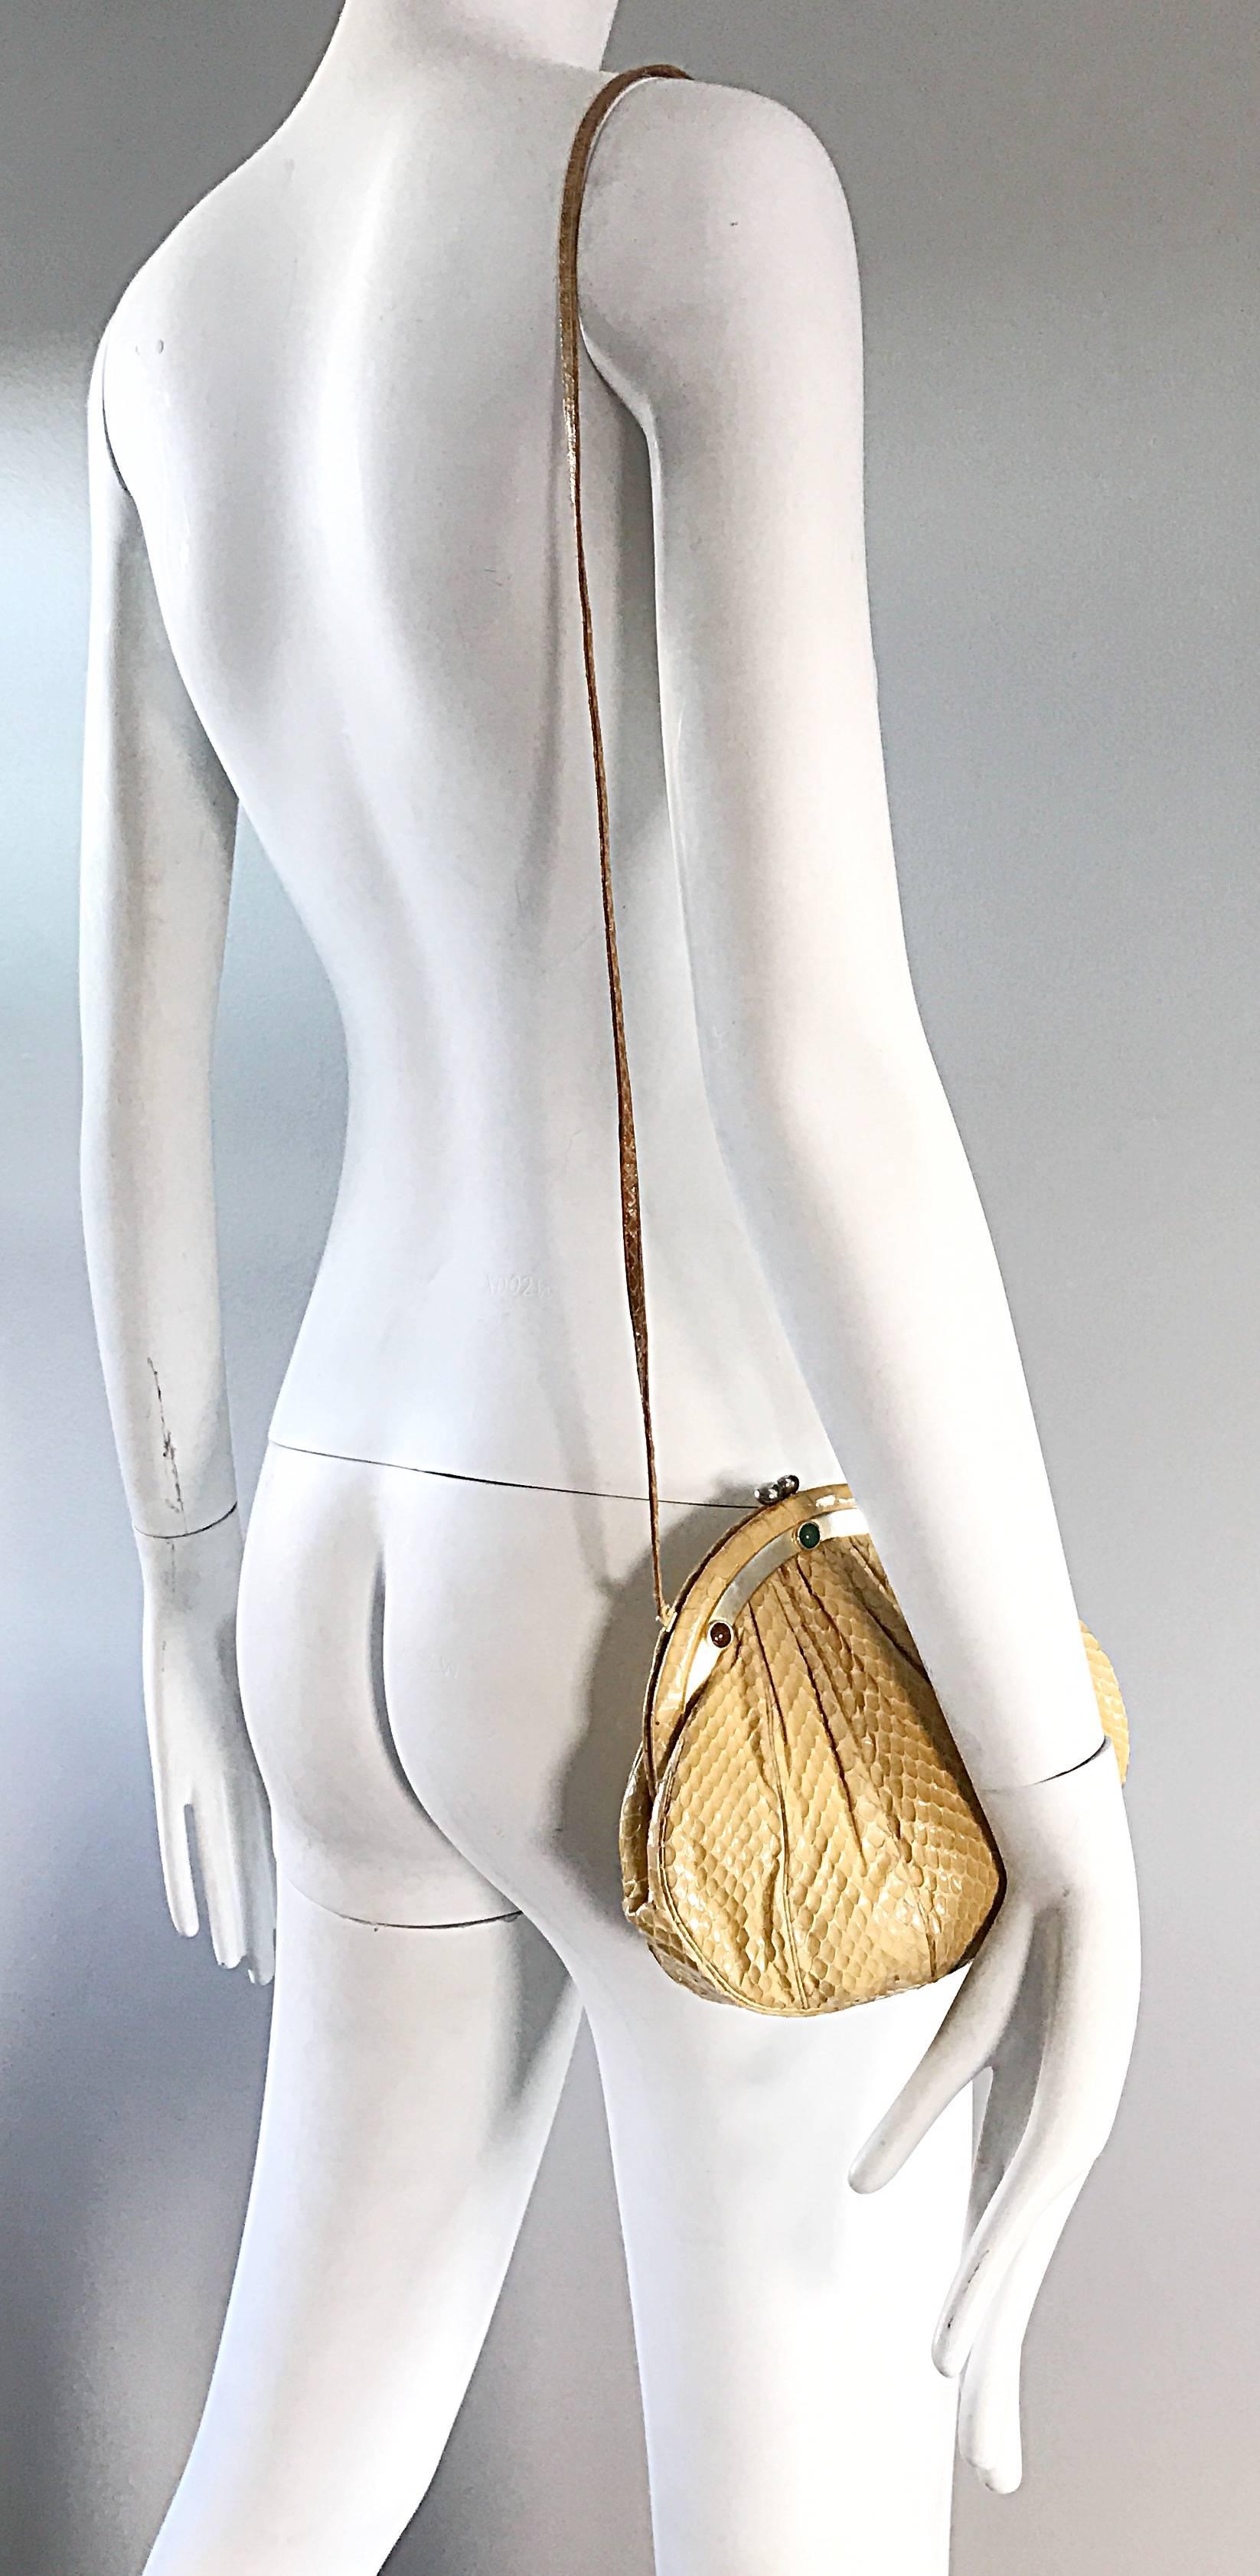 Vintage Judith Leiber Python Snakeskin Nude Tan Jeweled Shoulder Bag or Clutch  In Excellent Condition For Sale In San Diego, CA